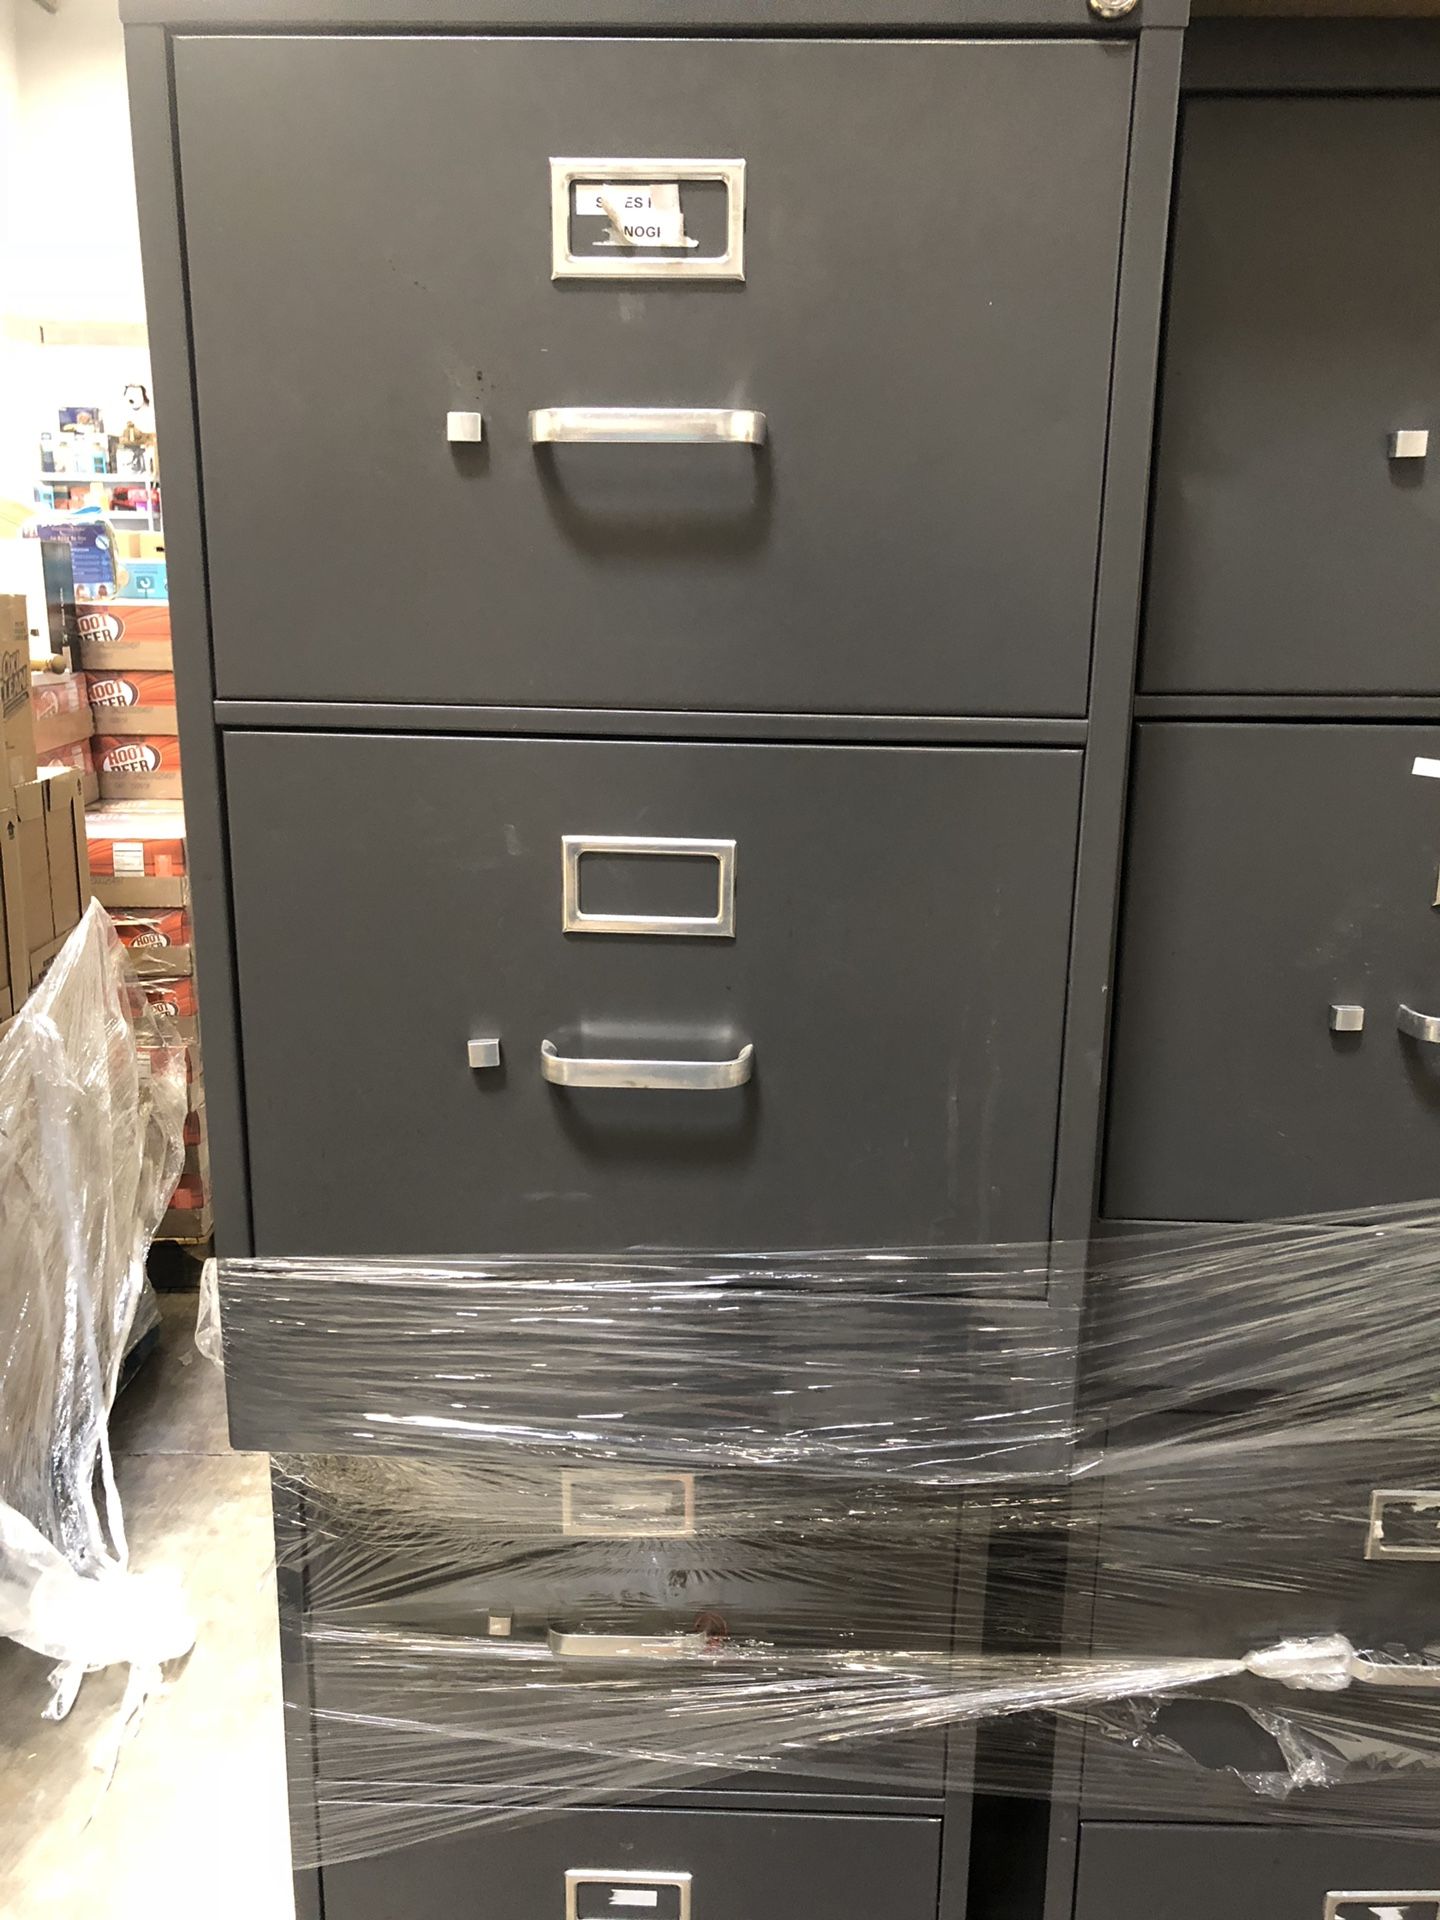 7(seven) two draw filing cabinets